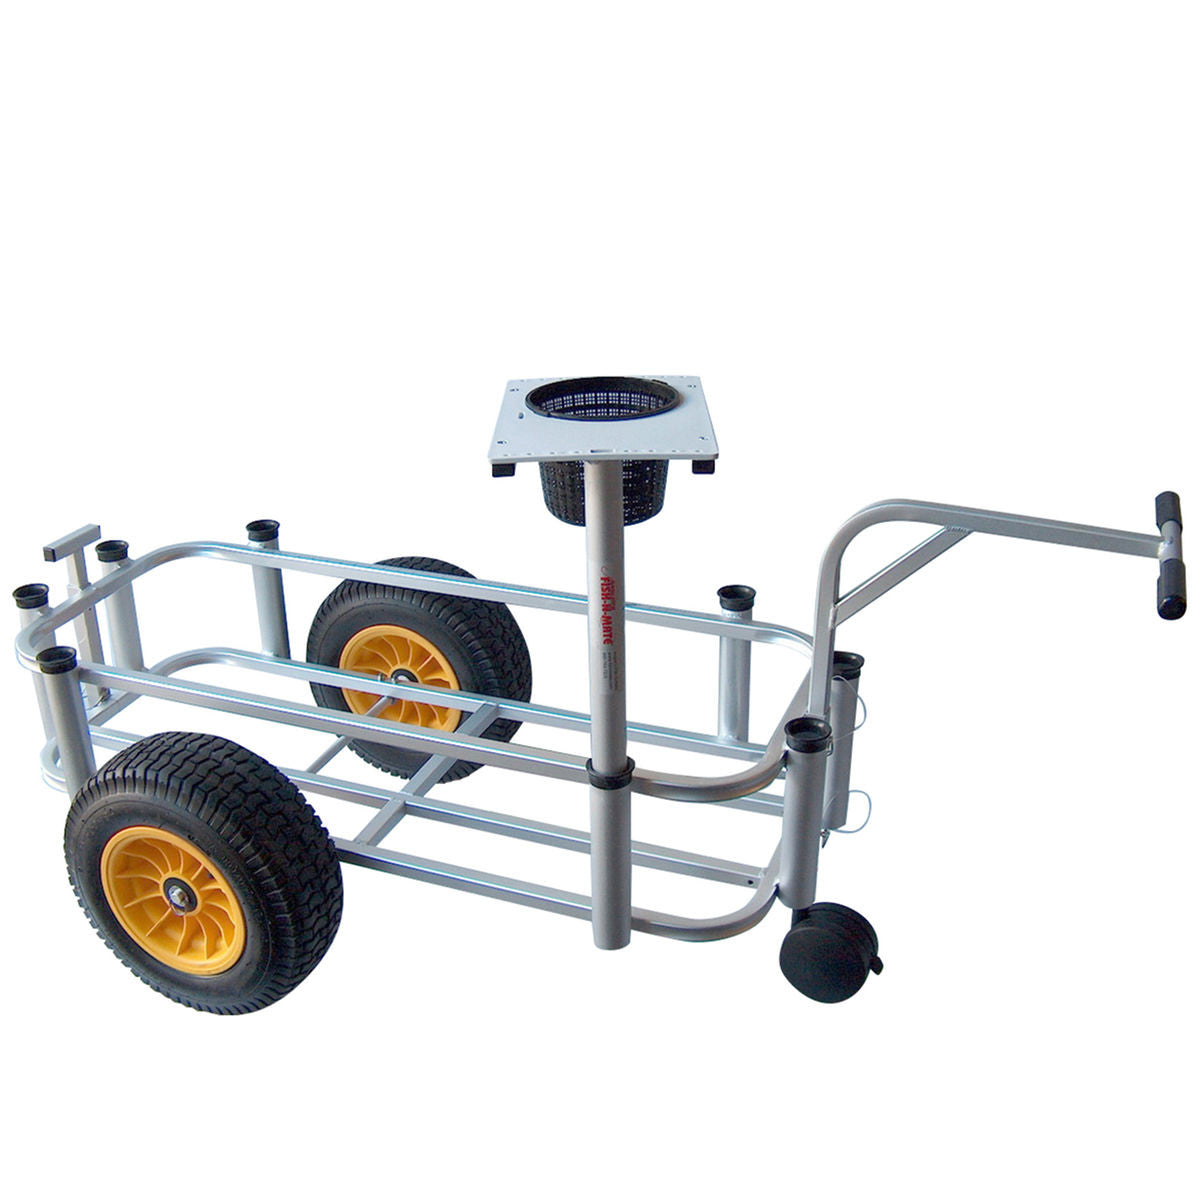 Large Fishing Cart with Front Caster by Fish N Mate – Beach